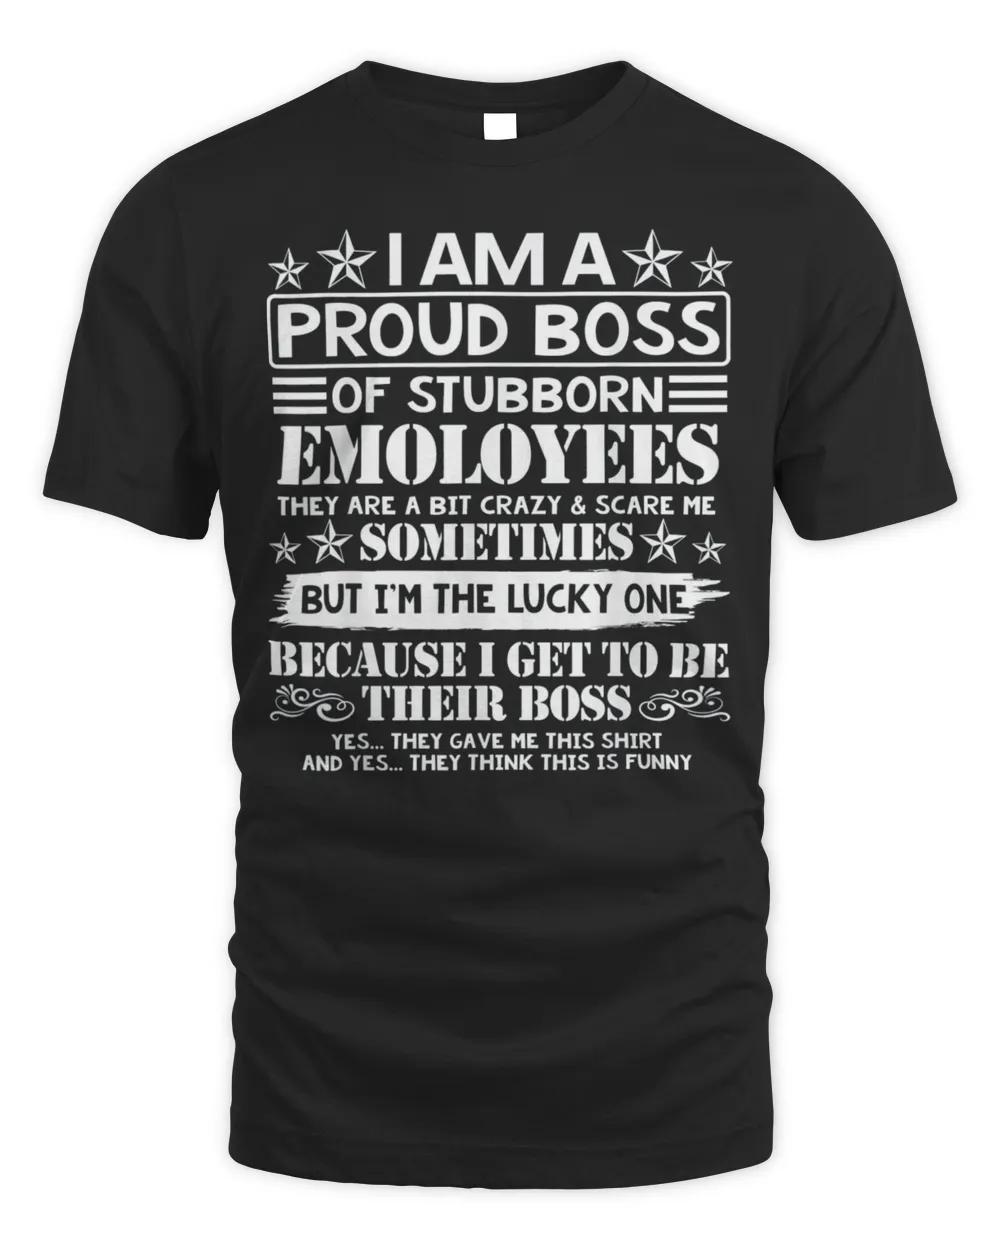 Official I Am A Proud Boss Of Stubborn Employees They Are Bit Crazy & Scare Me T-Shirt